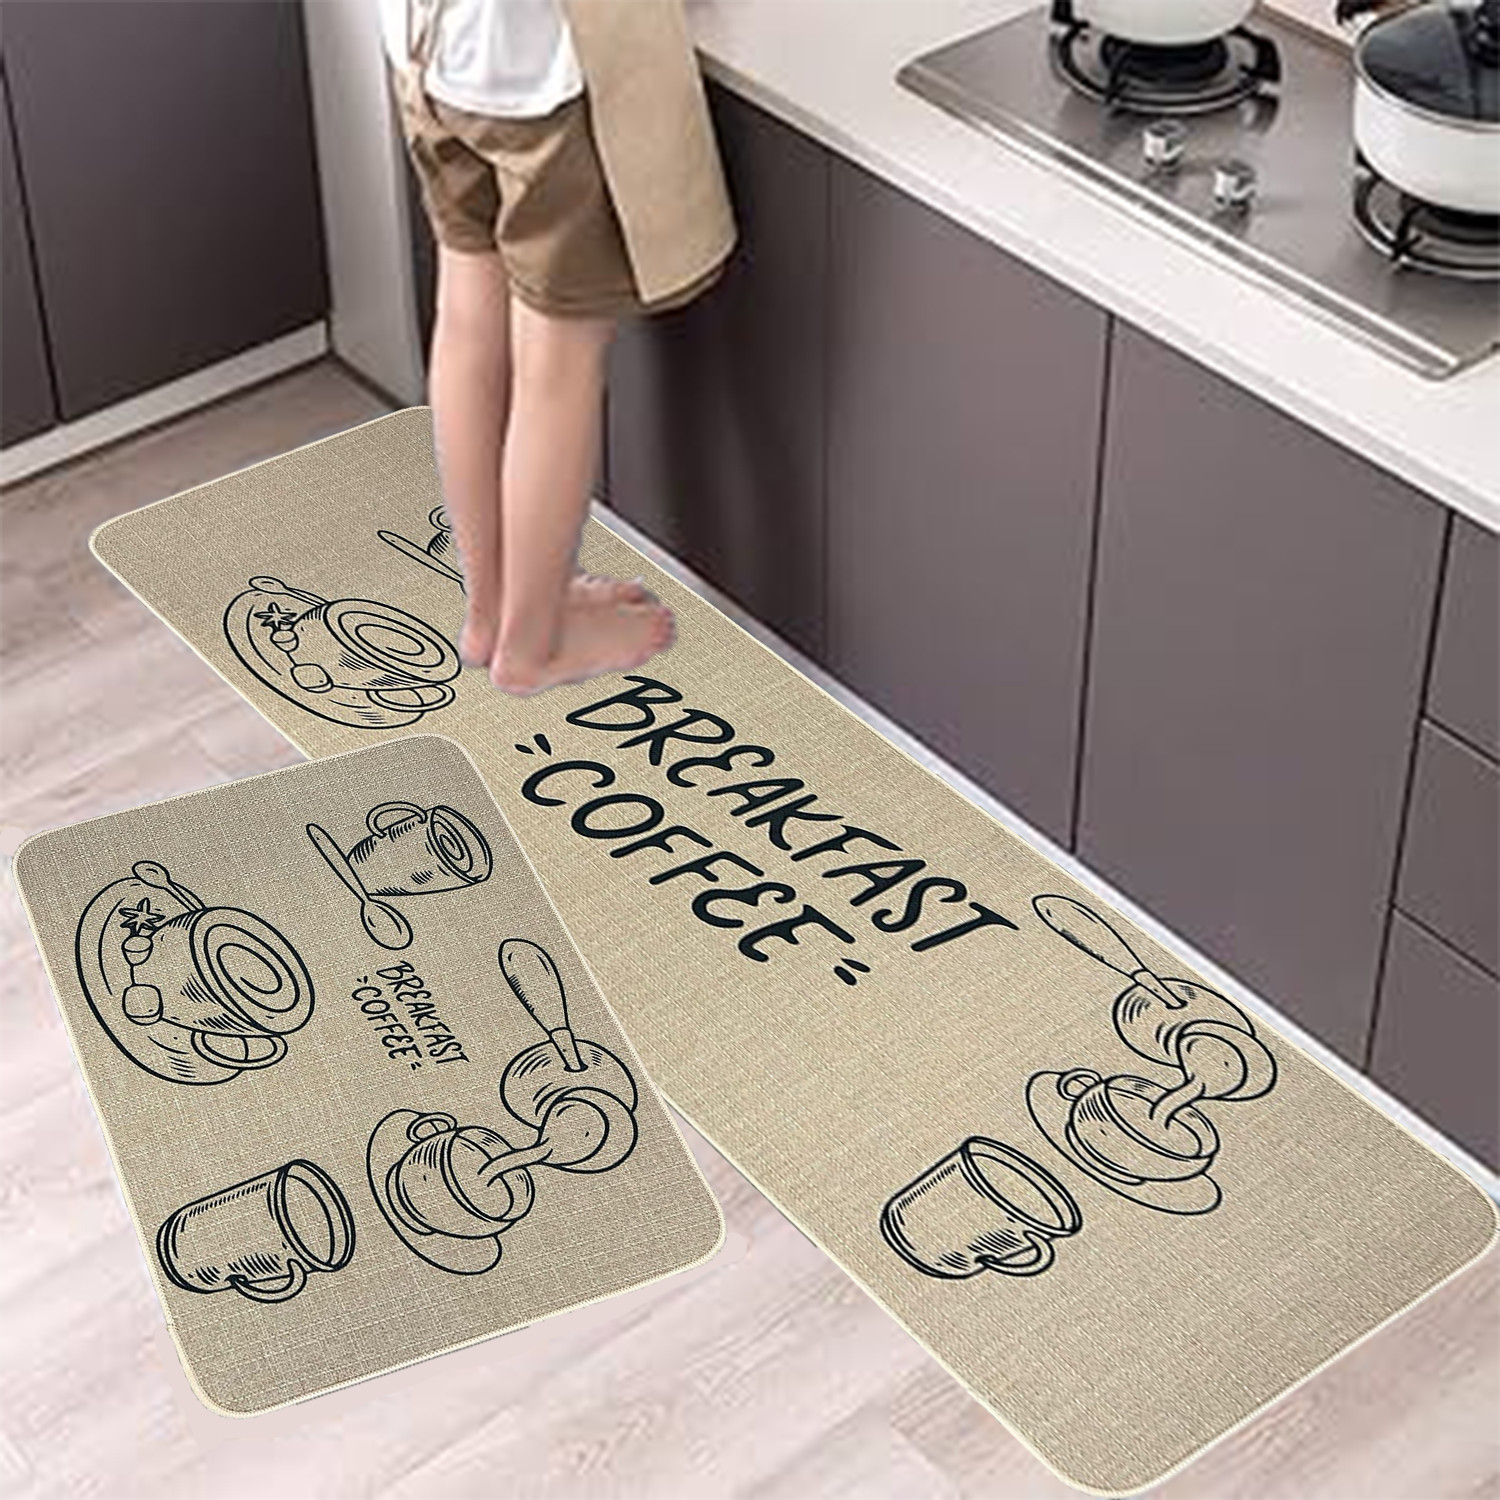 Kitchen+Rugs+Set%2C+2+Pieces+Kitchenware+Style+Non+Slip+Kitchen+Mat%2C+Easy+to+Clean+Comfort+Standing+Mats+for+Kitchen%2C+Home%2C+Office%2CLaundry%2CLiving+Room